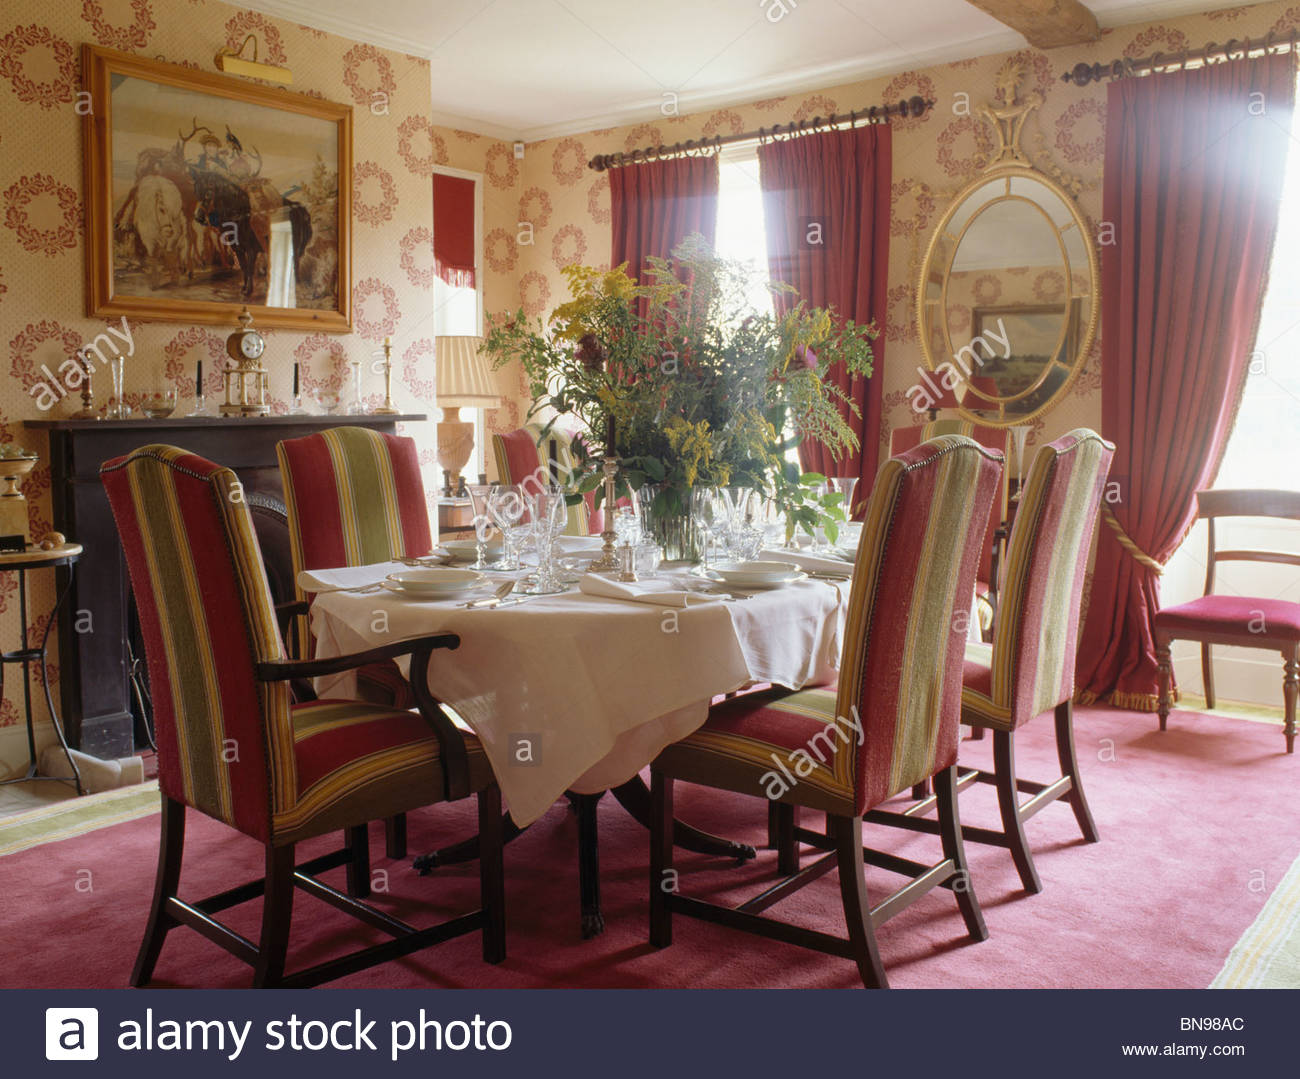 Patterned Wallpaper And Striped Upholstered Chairs In Traditional